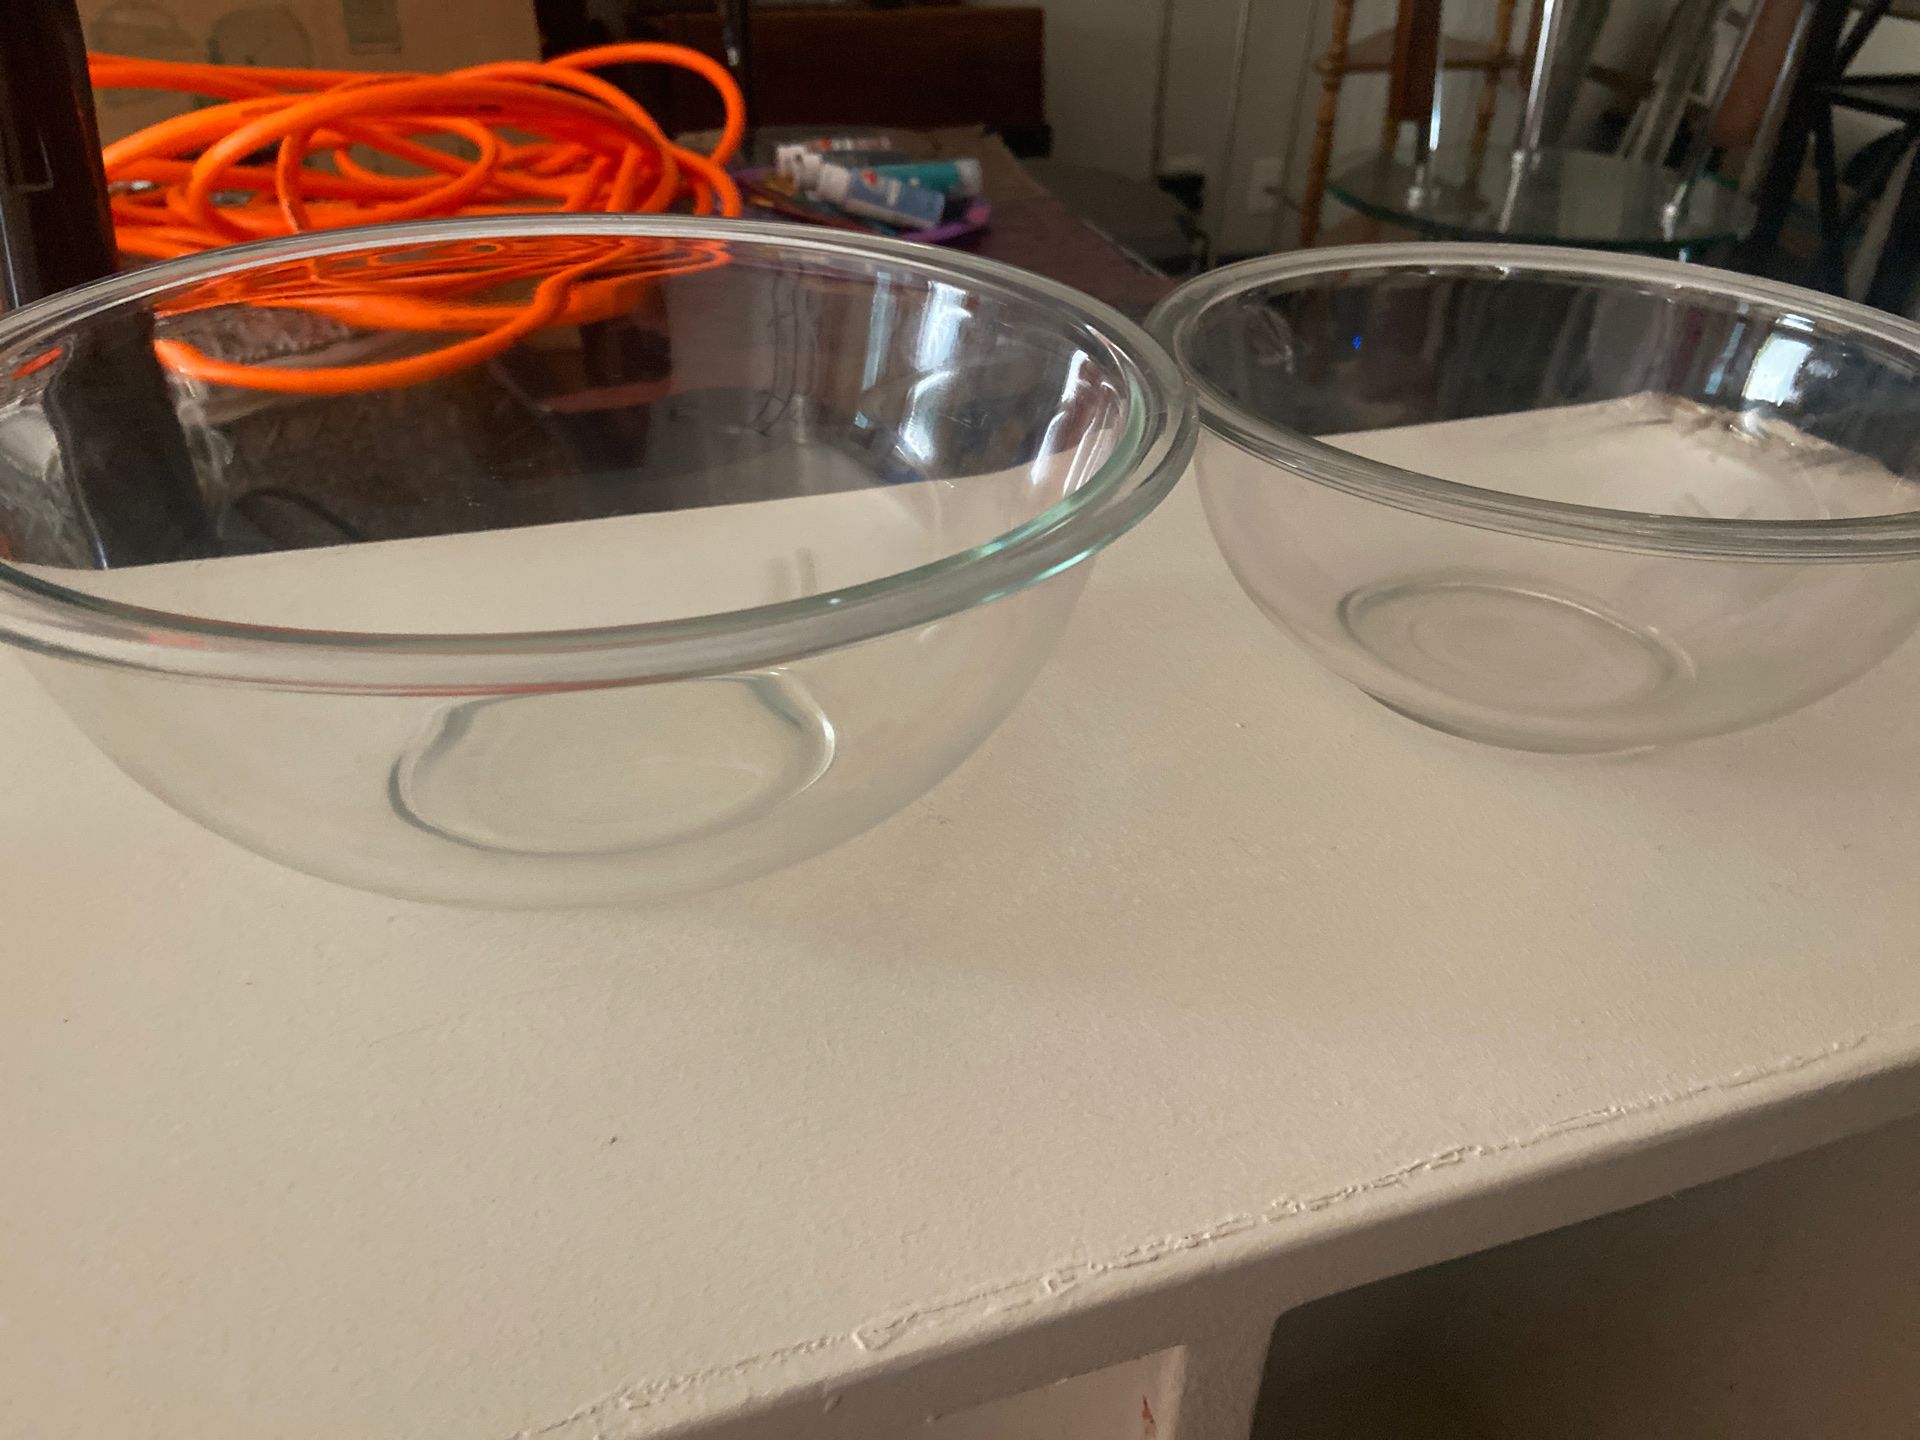 2 pyrex cooking ware bowls One is 2.5 L the other is 1.5 L